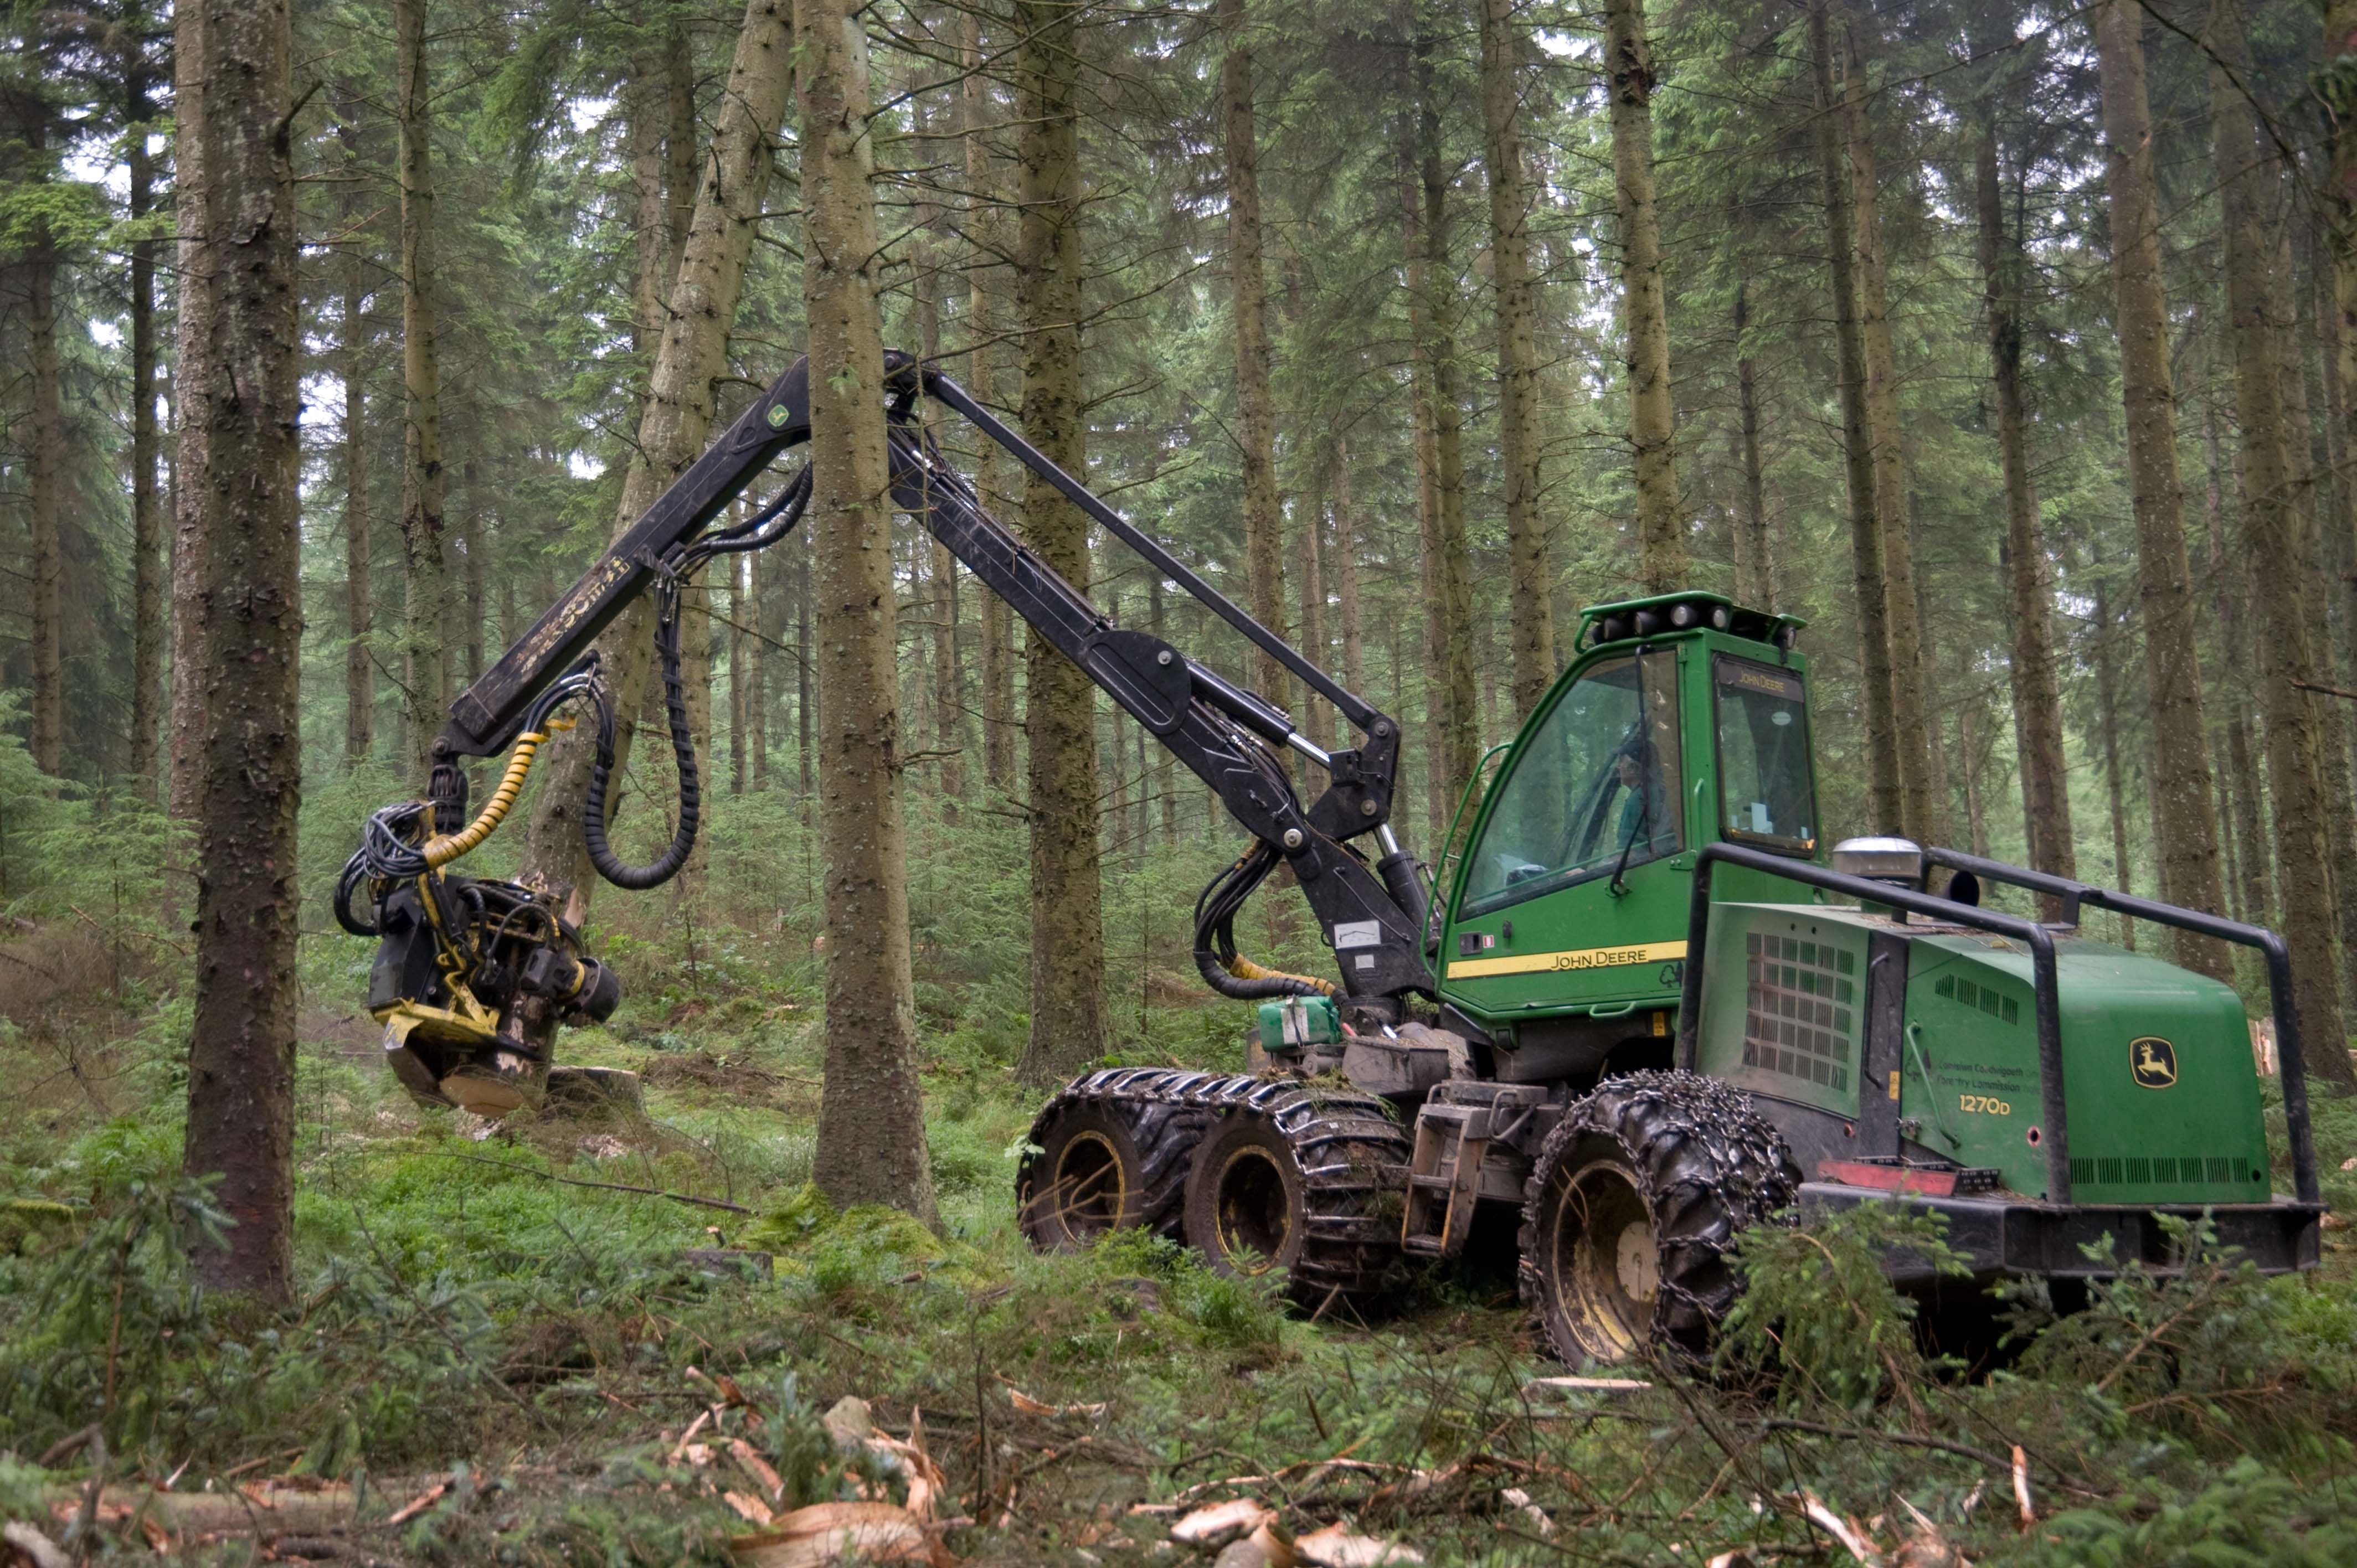 Forestry Jobs Summit a “catalyst for job opportunities” says Ewing